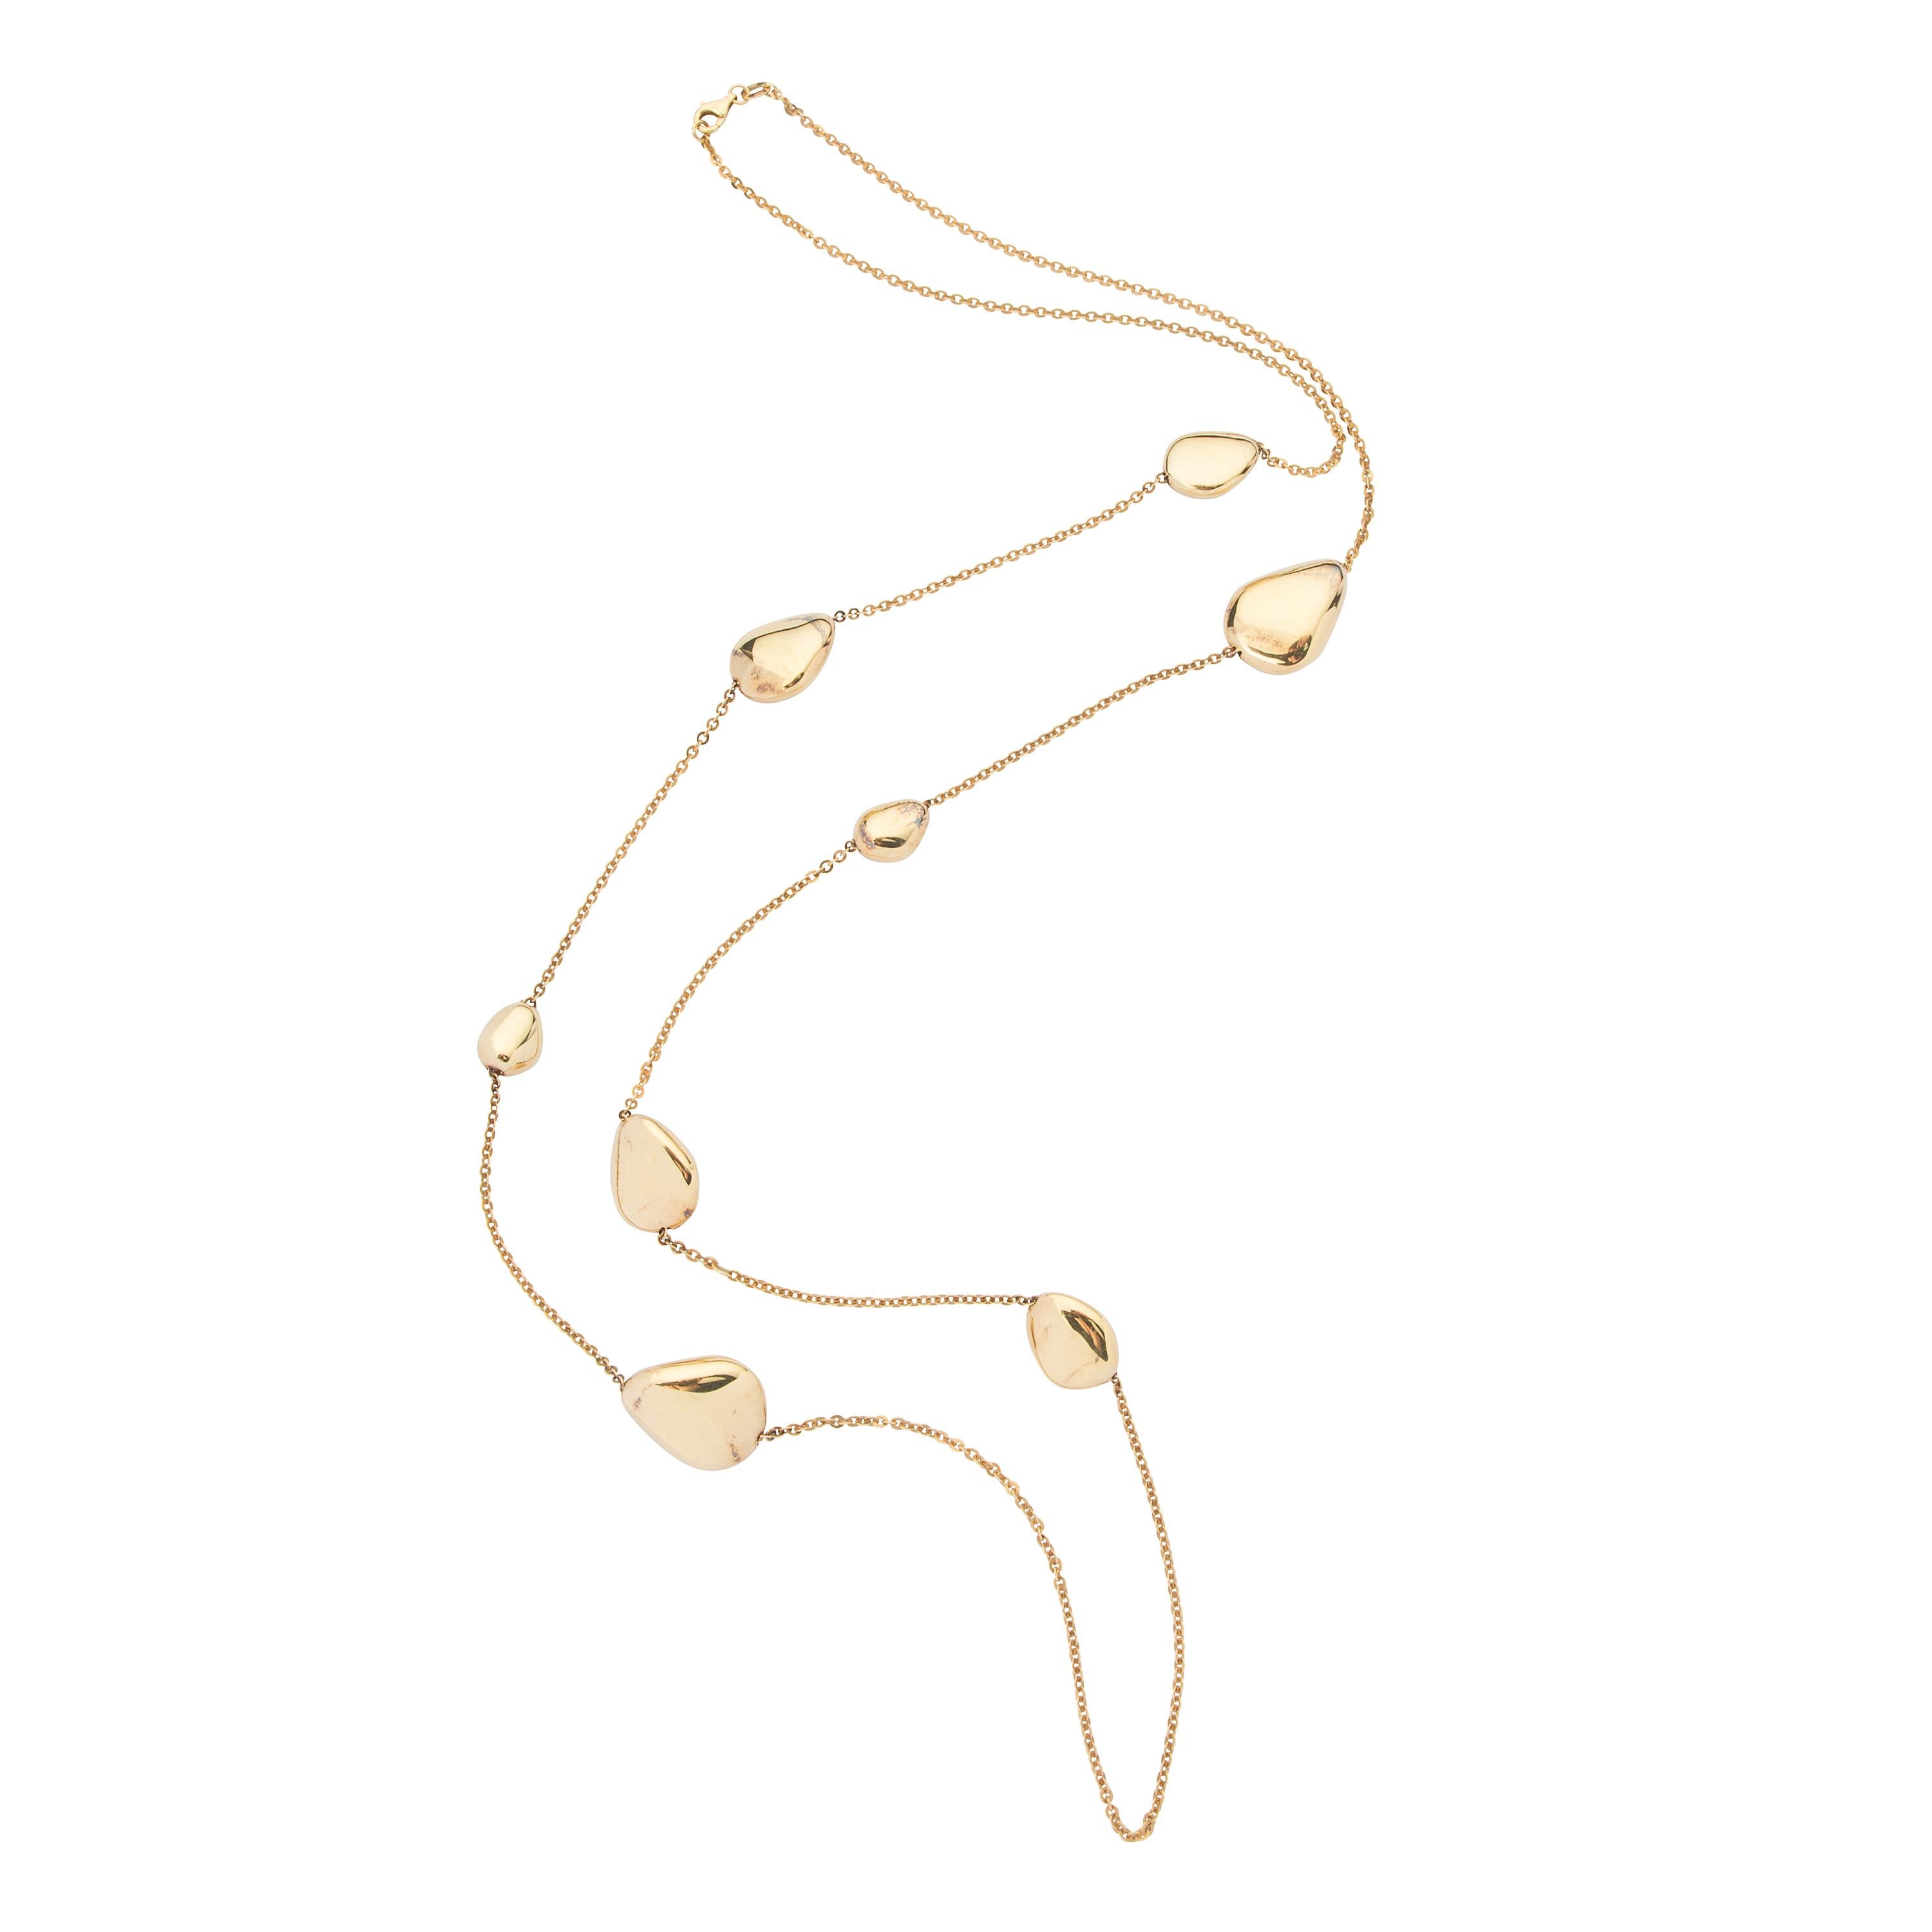 18 karat yellow gold long necklace featuring 8 gold nuggets.